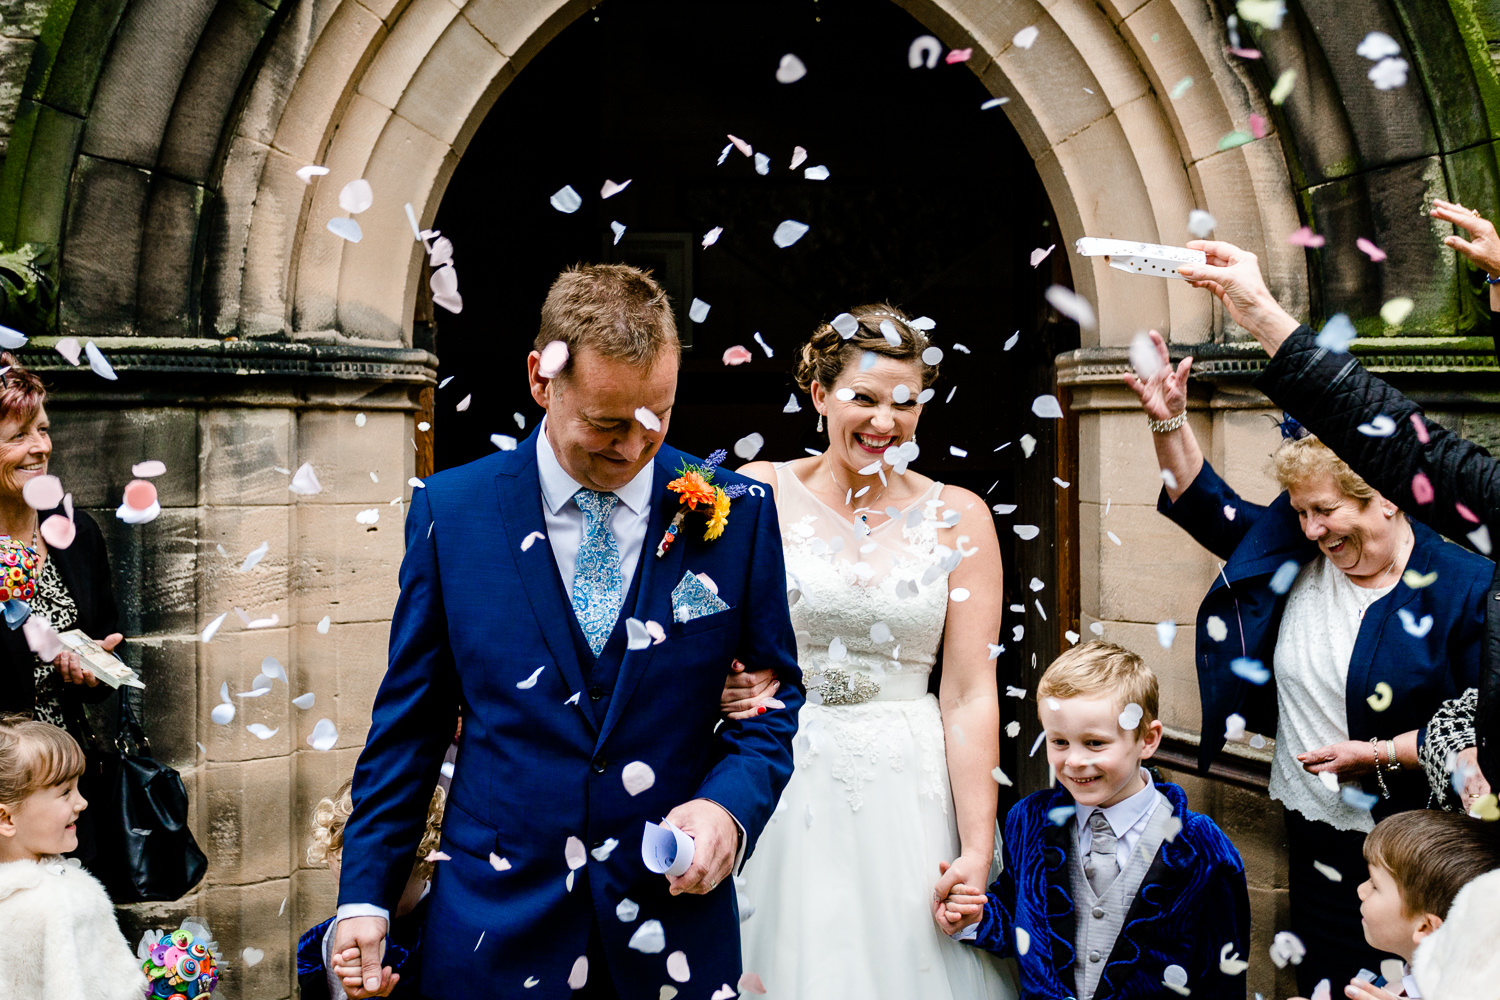 Confetti being thrown over a bride and groom outside a wedding at Christ Church in Bebington, Wirral. 